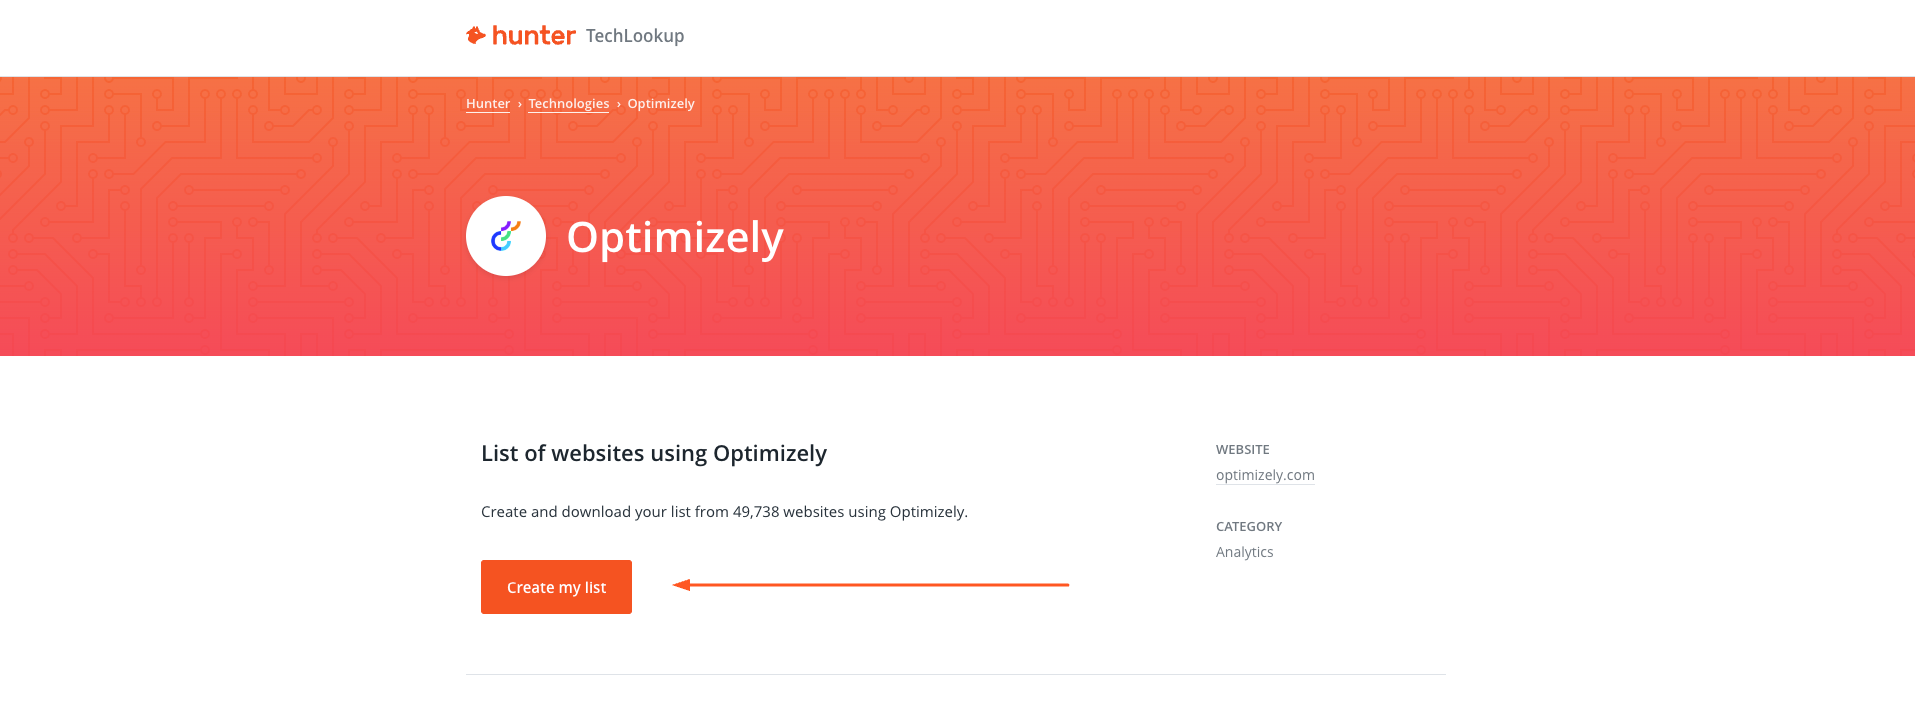 List of websites using Optimizely